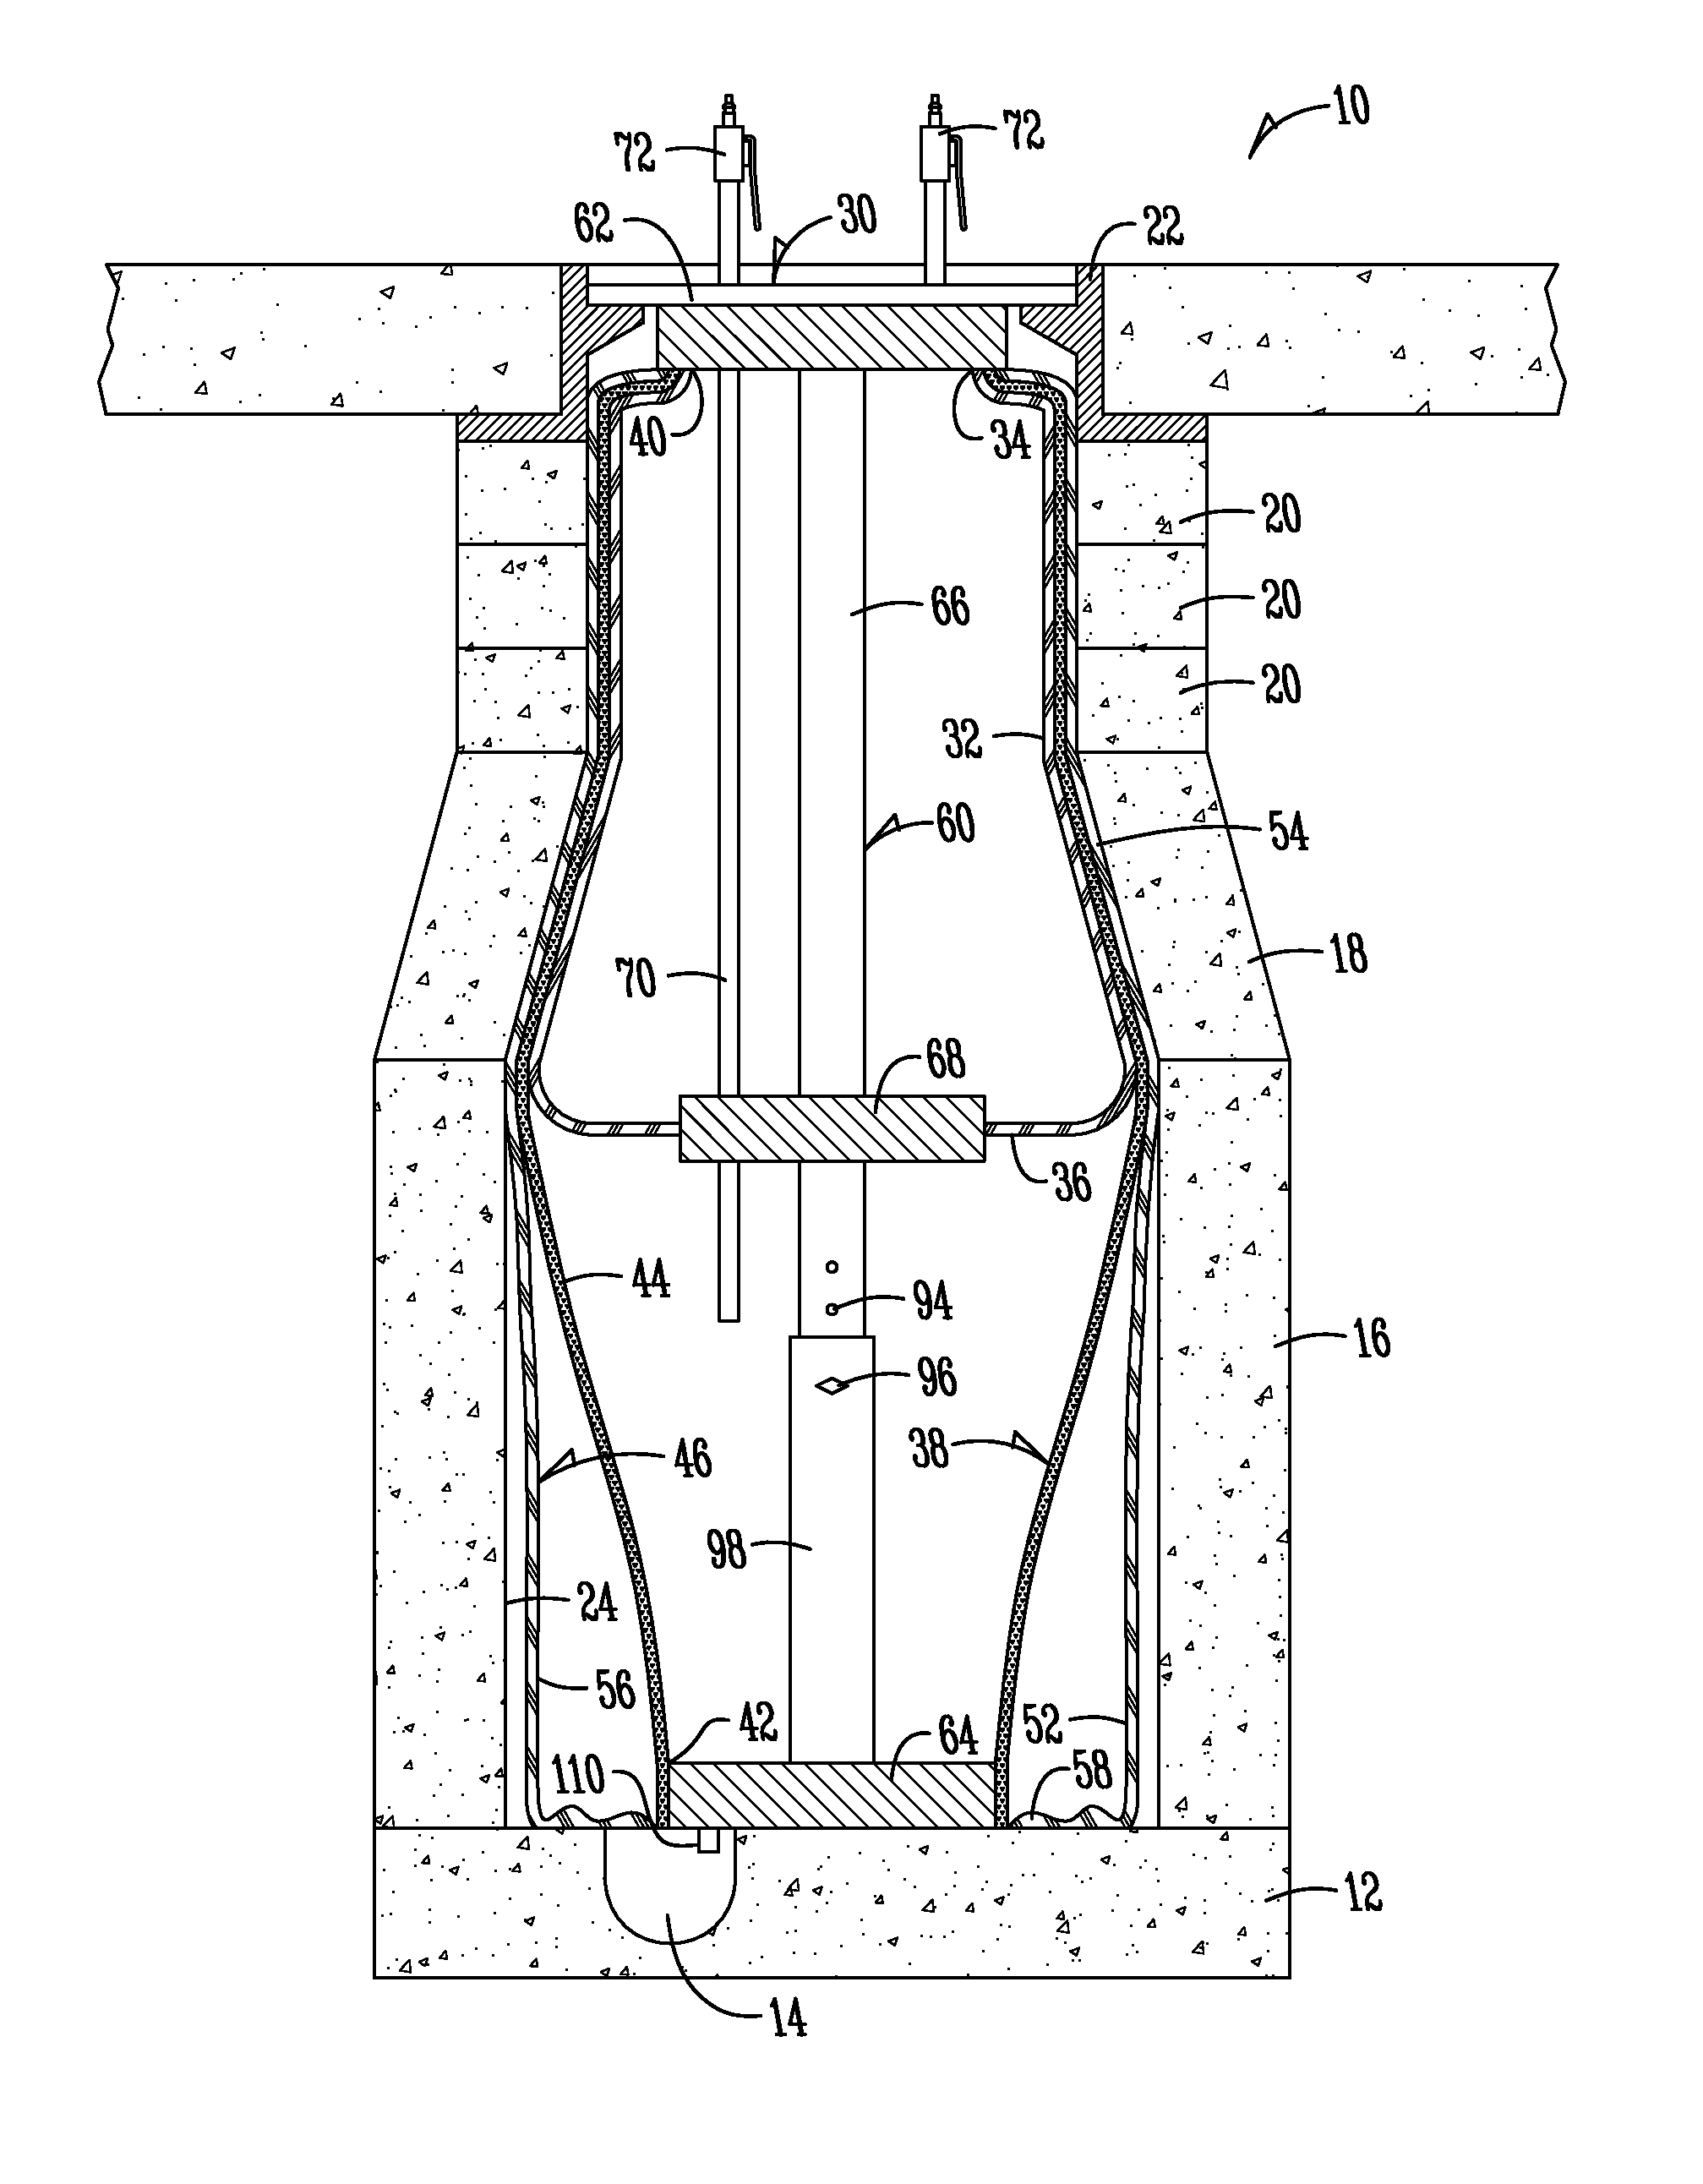 Method and means of lining a manhole